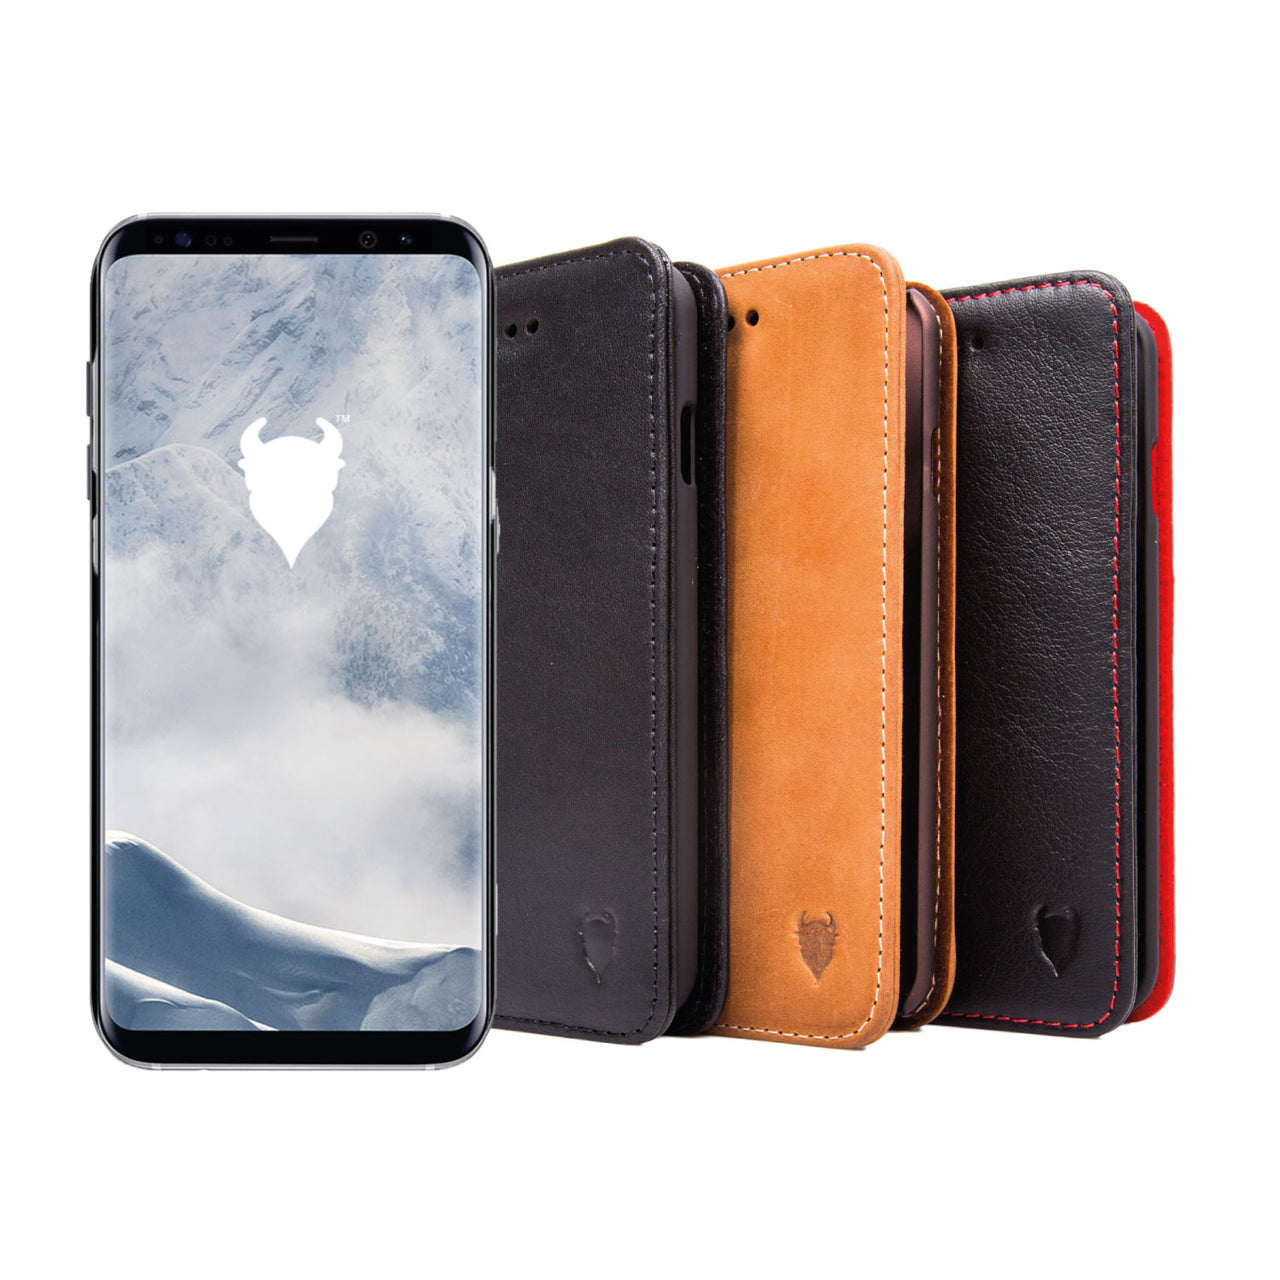 Samsung Galaxy S9 Genuine Leather Case with Stand | Artisancover